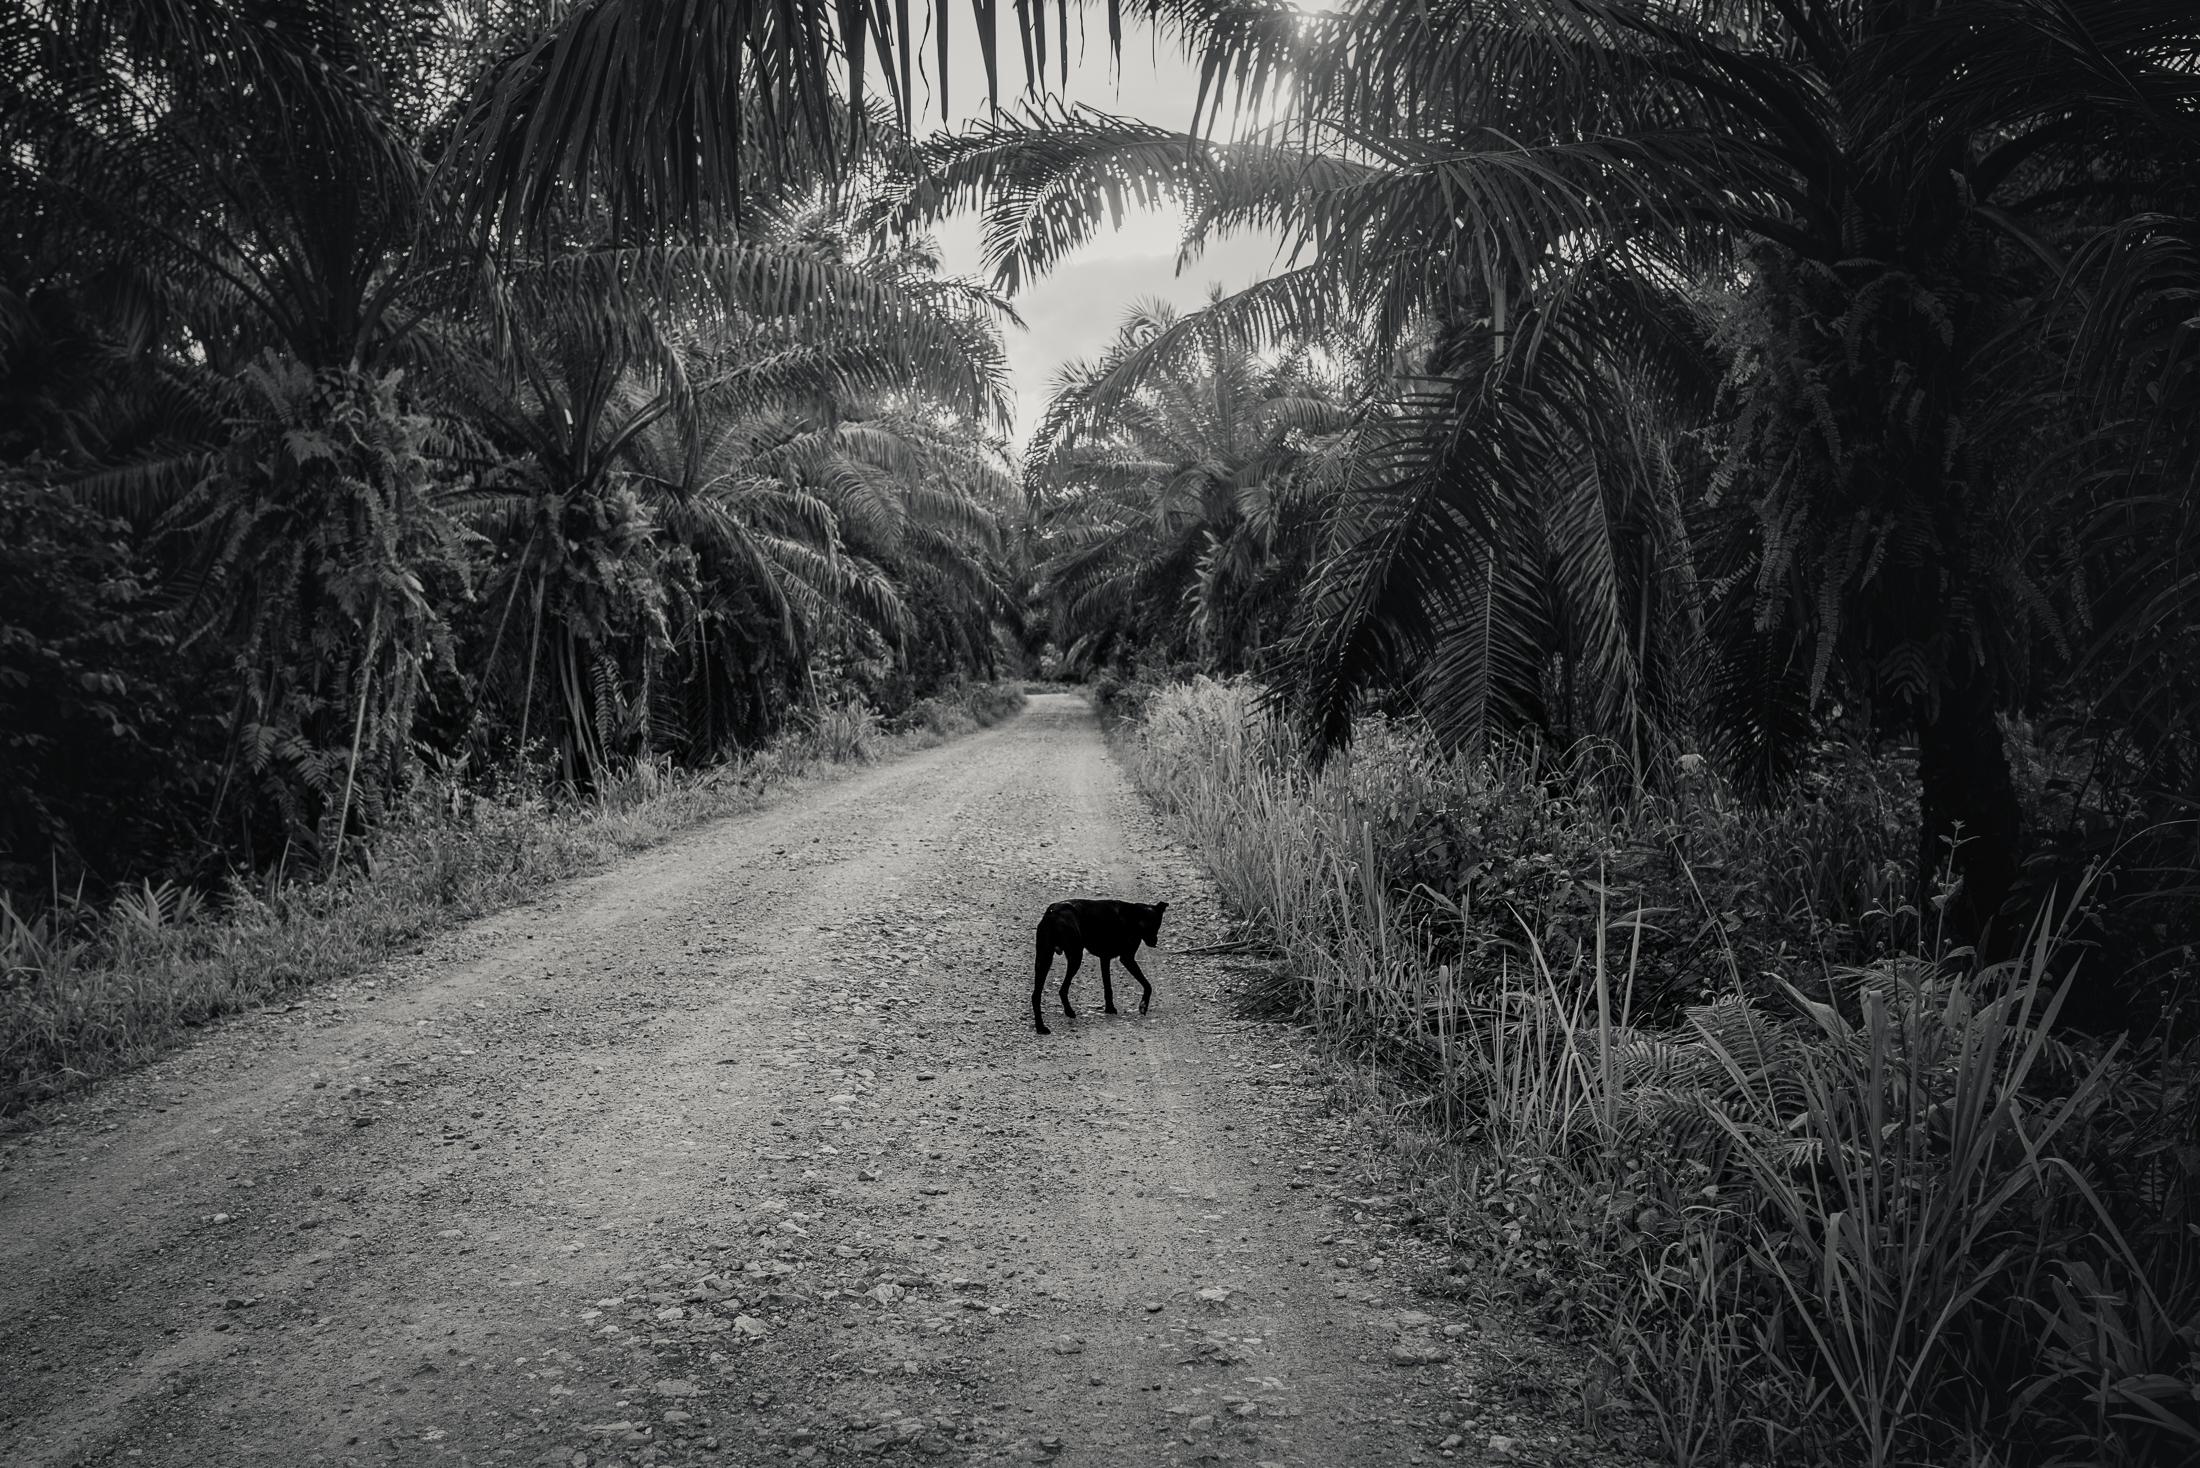 Indigenous Land Rights in Sarawak -  An Oil Palm Plantation in Borneo, Malaysia.          